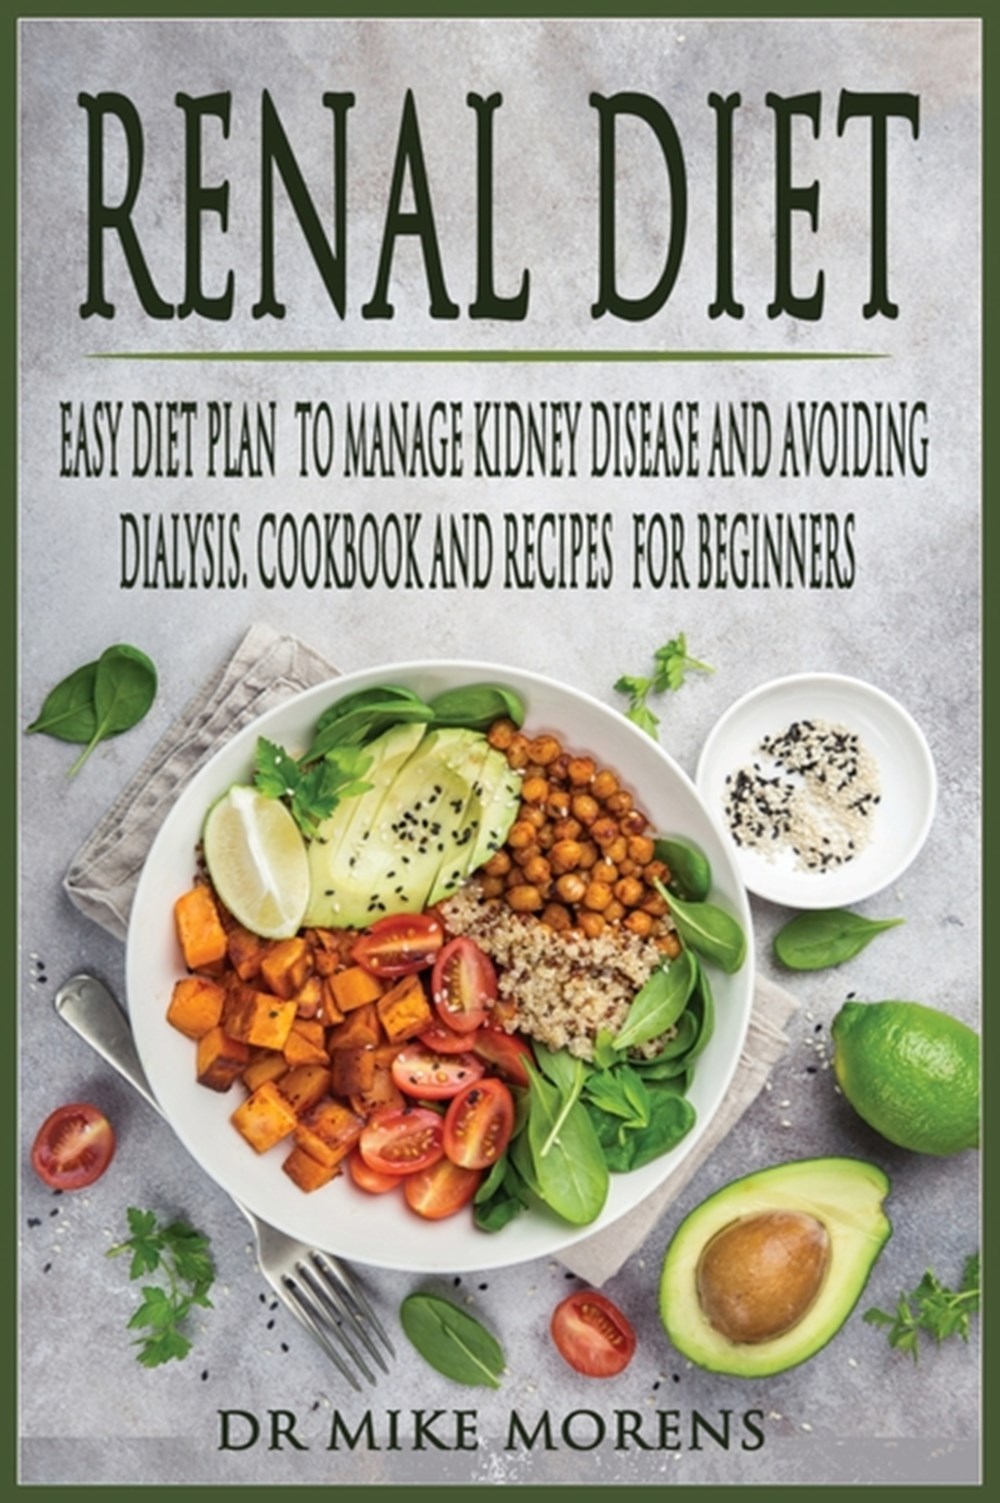 Diabetic And Renal Diet Recipes / Renal - Diabetic Menu (With images